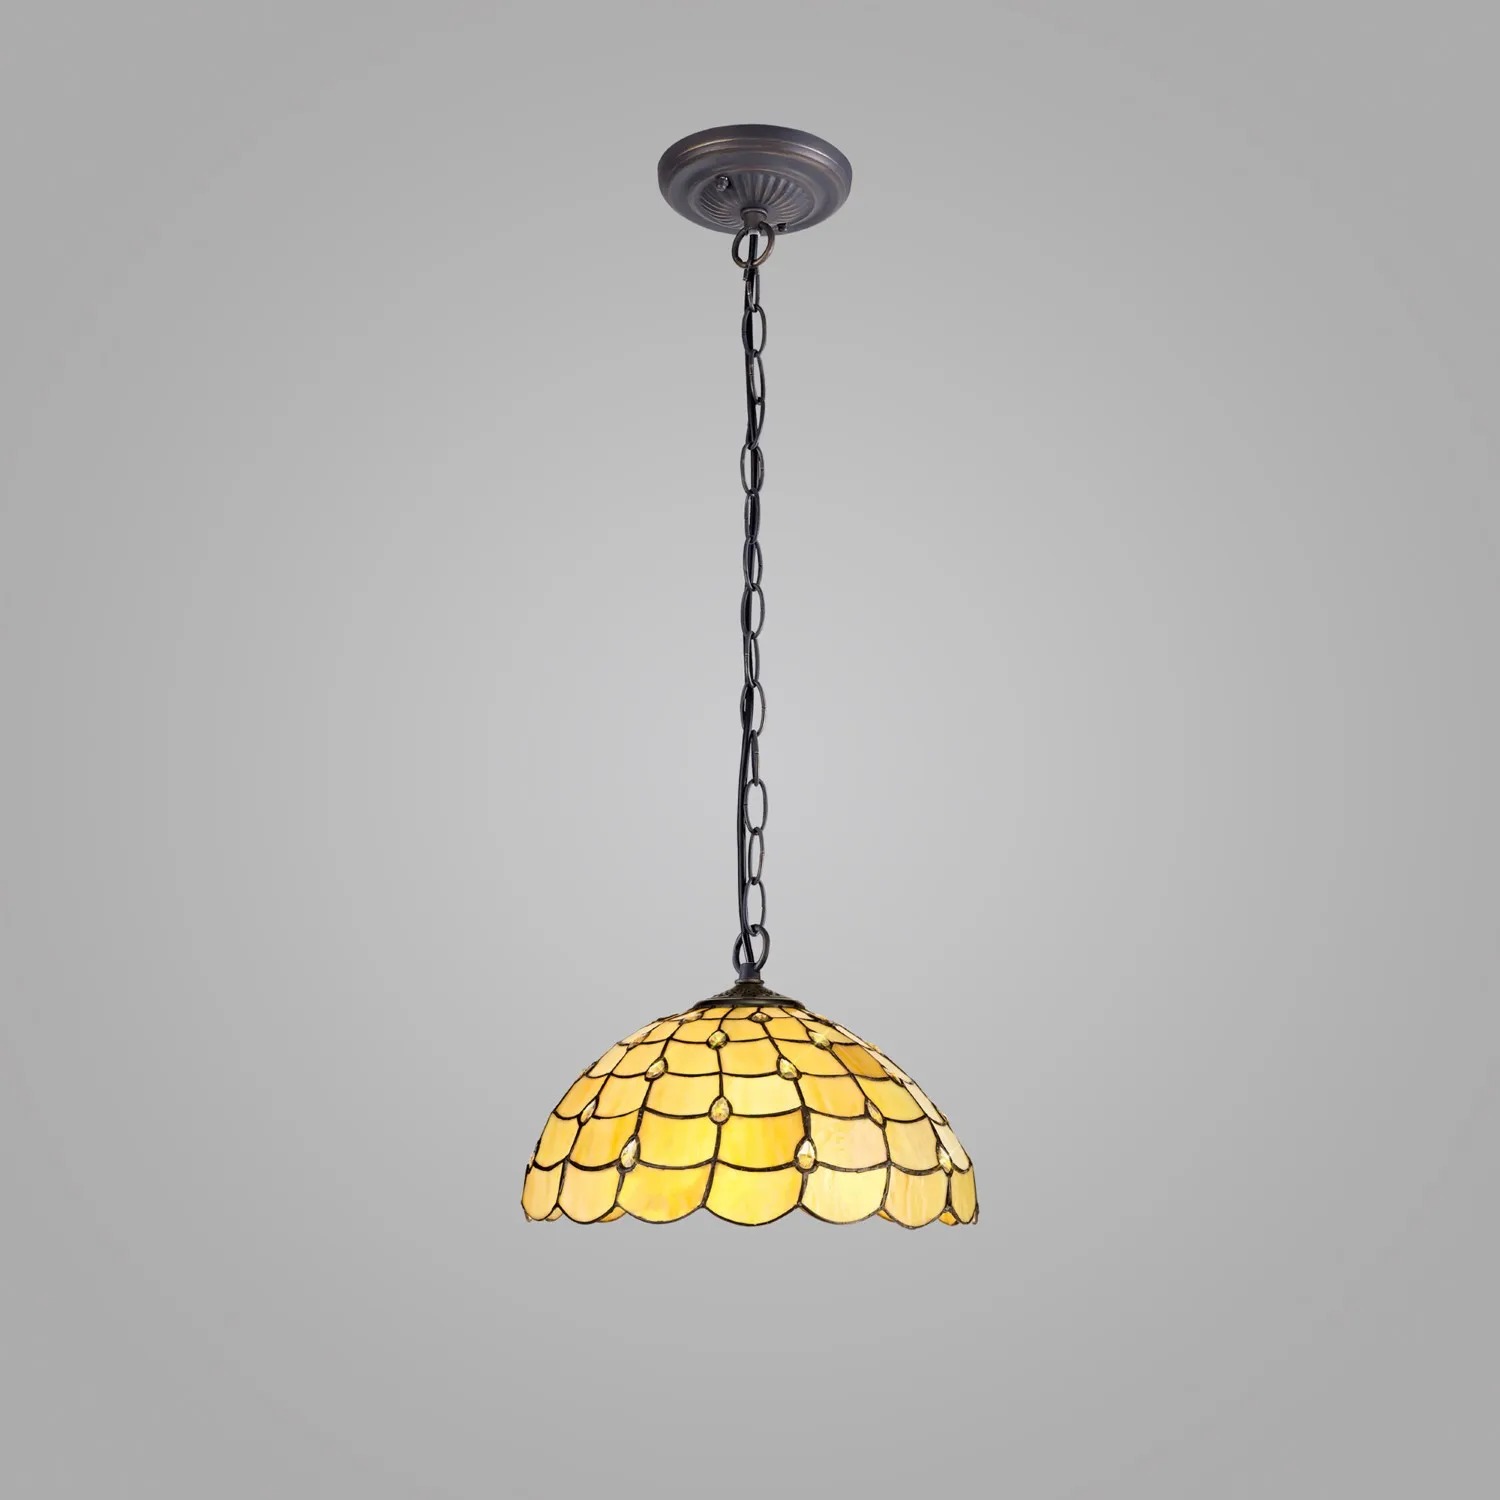 Stratford 1 Light Downlighter Pendant E27 With 40cm Tiffany Shade, Beige Clear Crystal Aged Antique Brass